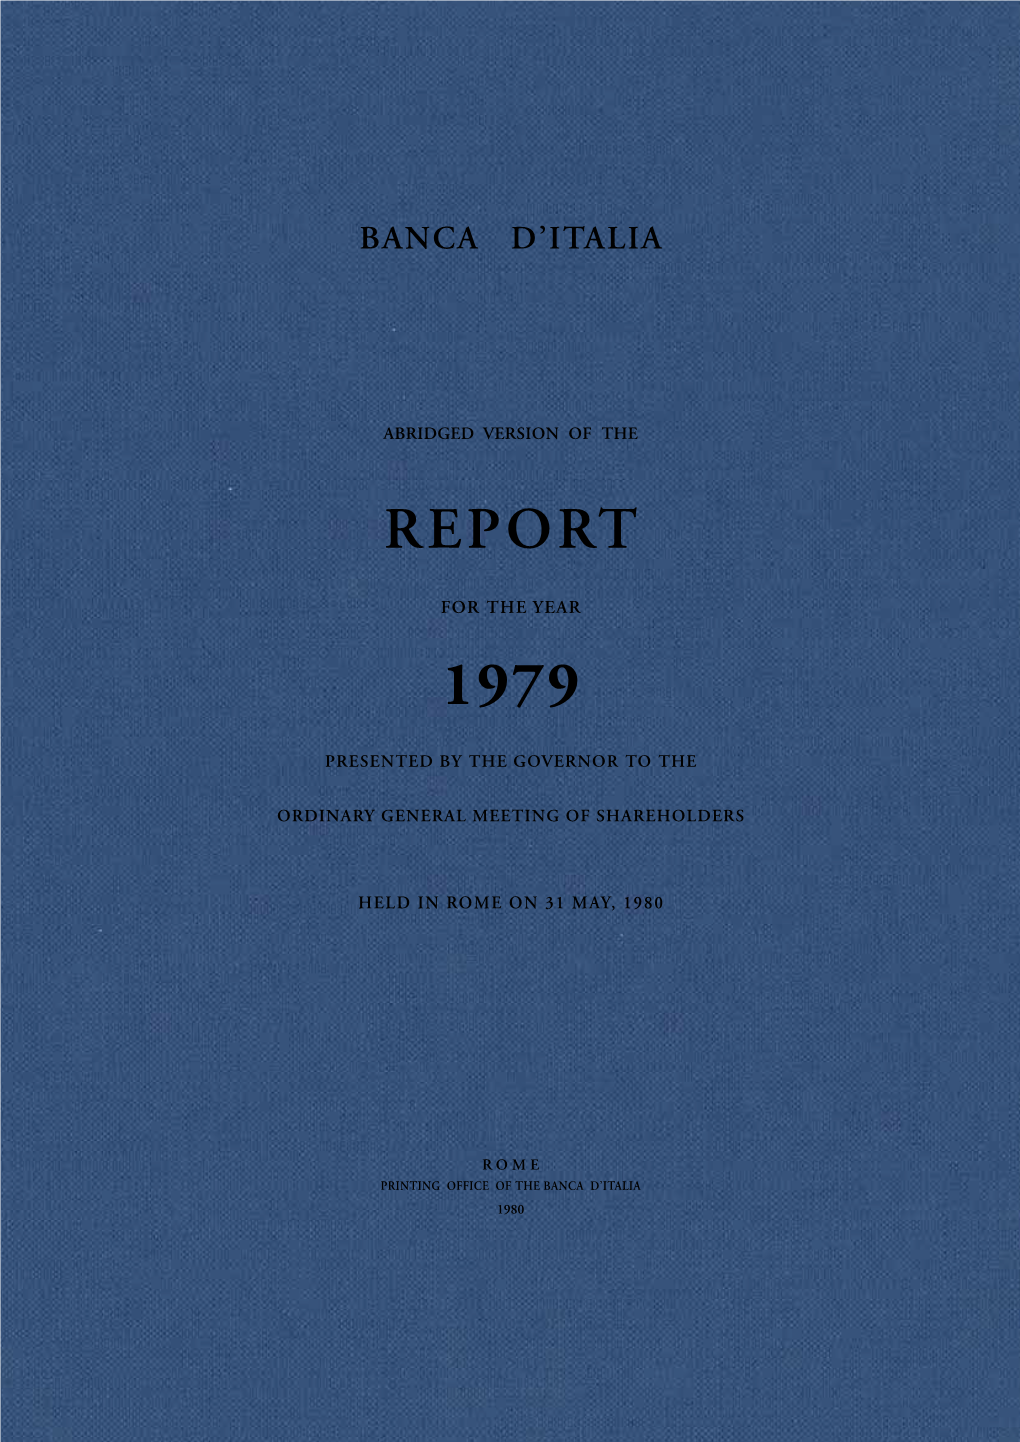 Annual Report for 1979